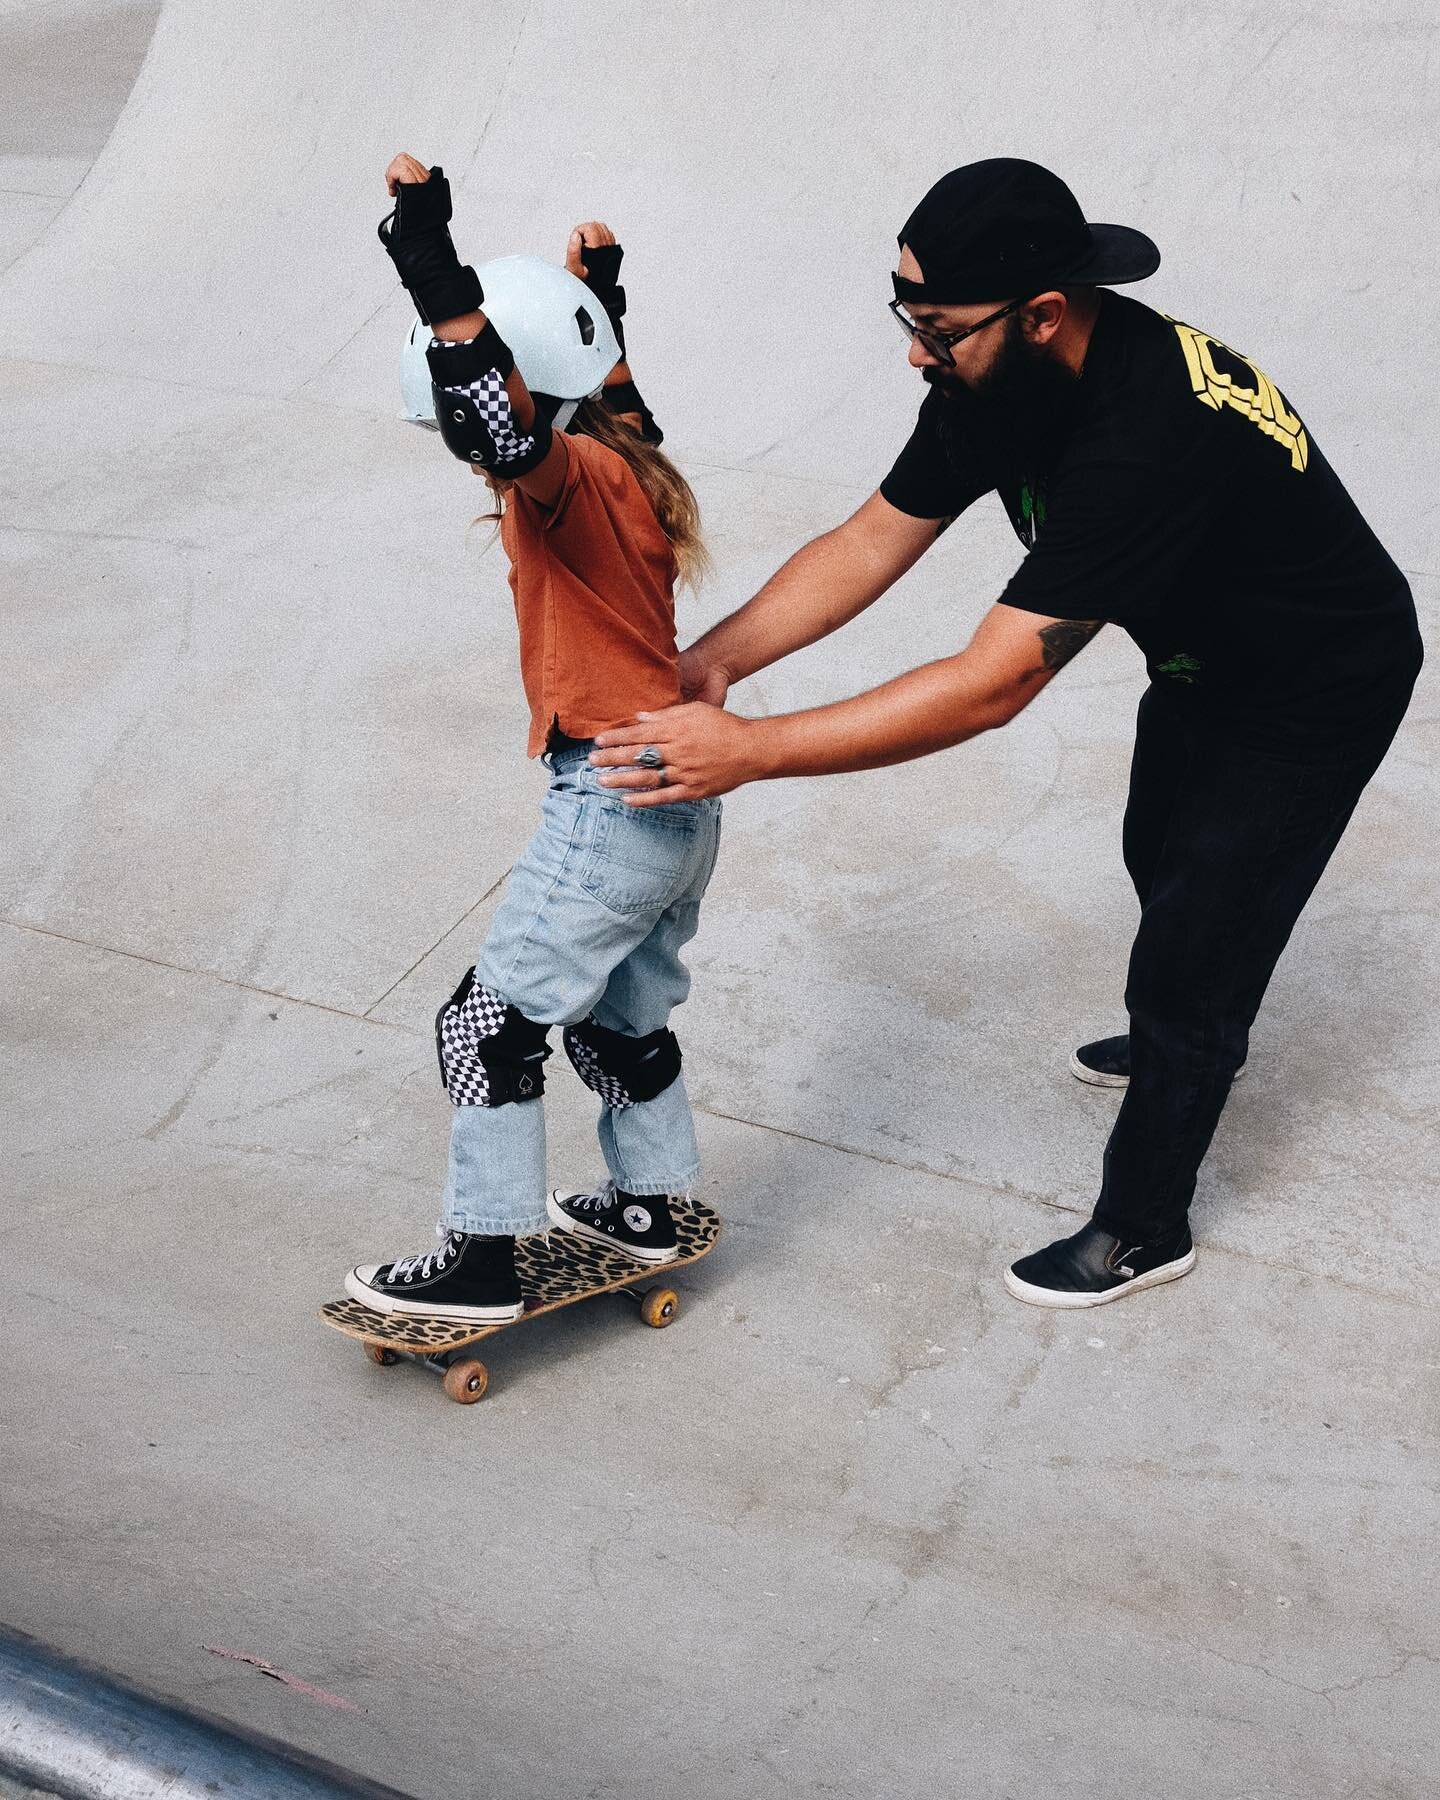 Sometimes homeschool looks like numbers, reading and table work but sometimes it looks like going to the skate park and honing skills with dad. Grateful for the flexibility this lifestyle provides and the ability we have to really do life together.

